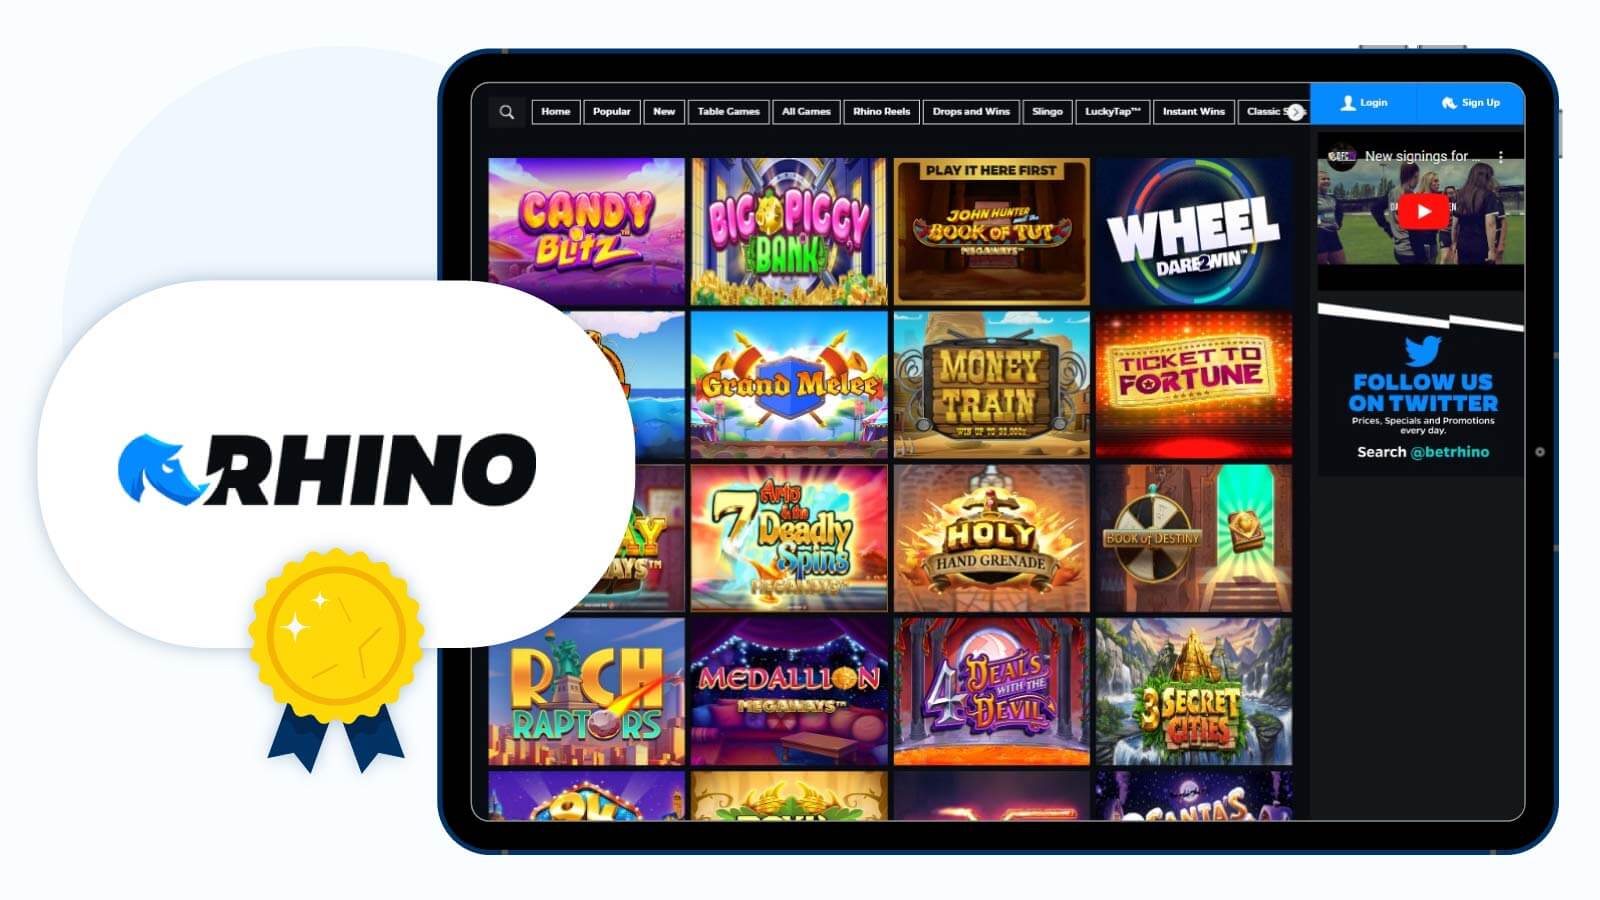 Rhino.bet-Casino-Best-Independent-Casino-for-Number-of-Slots